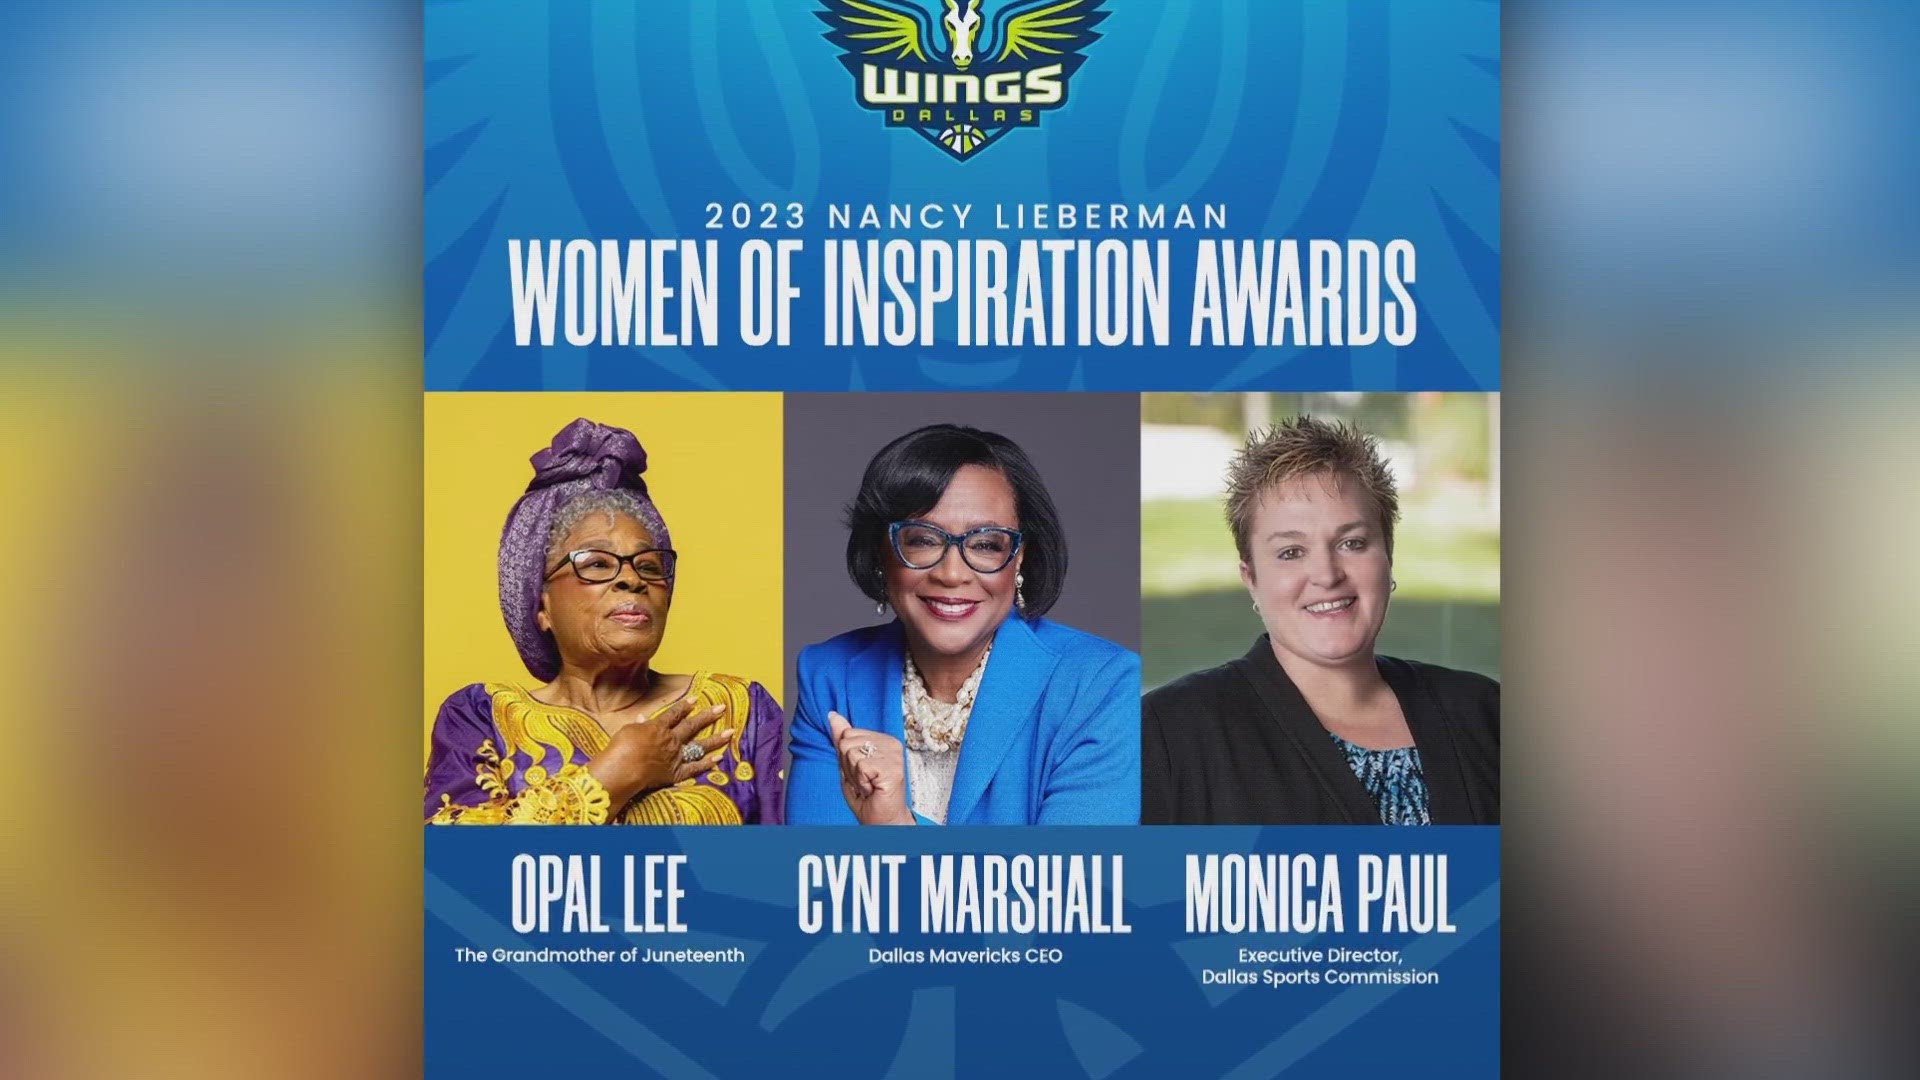 The 2023 Nancy Lieberman Women of Inspiration Awards will go to Opal Lee, Cynt Marshall and Monica Paul.